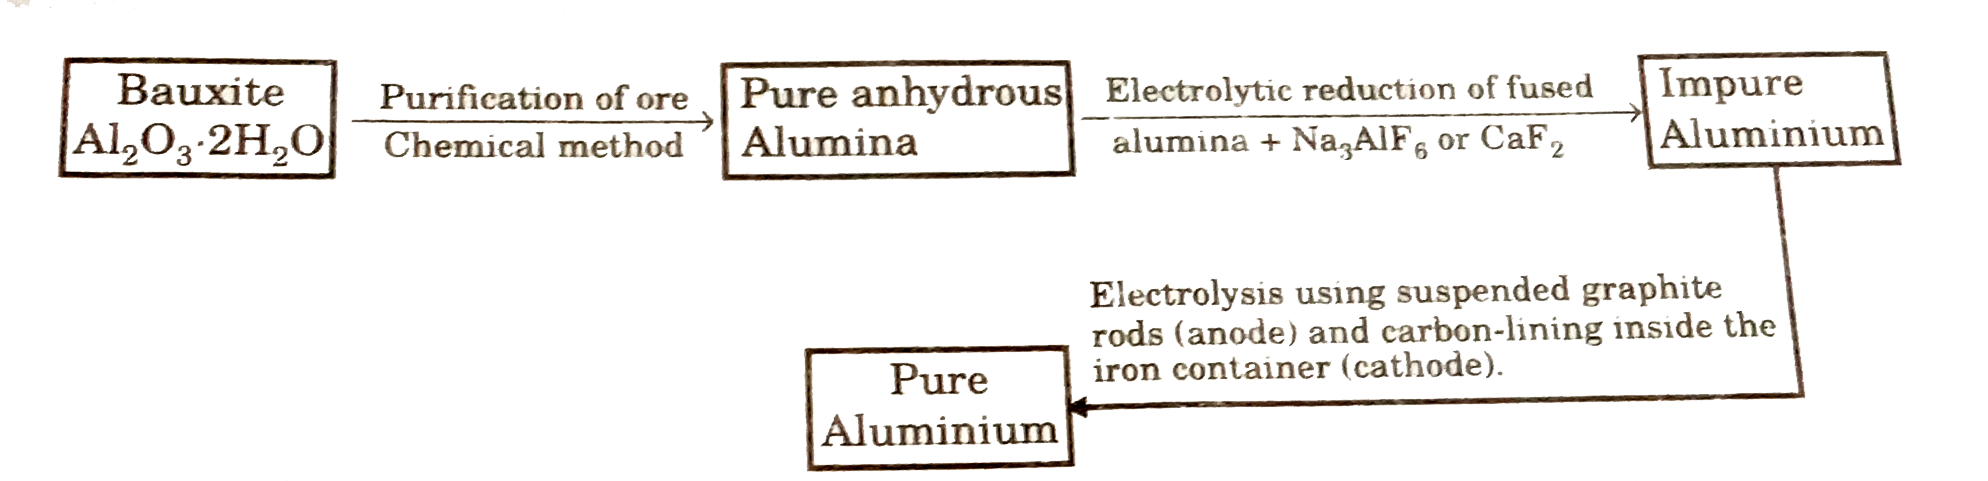 Following flow diagram represents the extraction of aluminium from bauxite,      The pure of adding cryolite is: